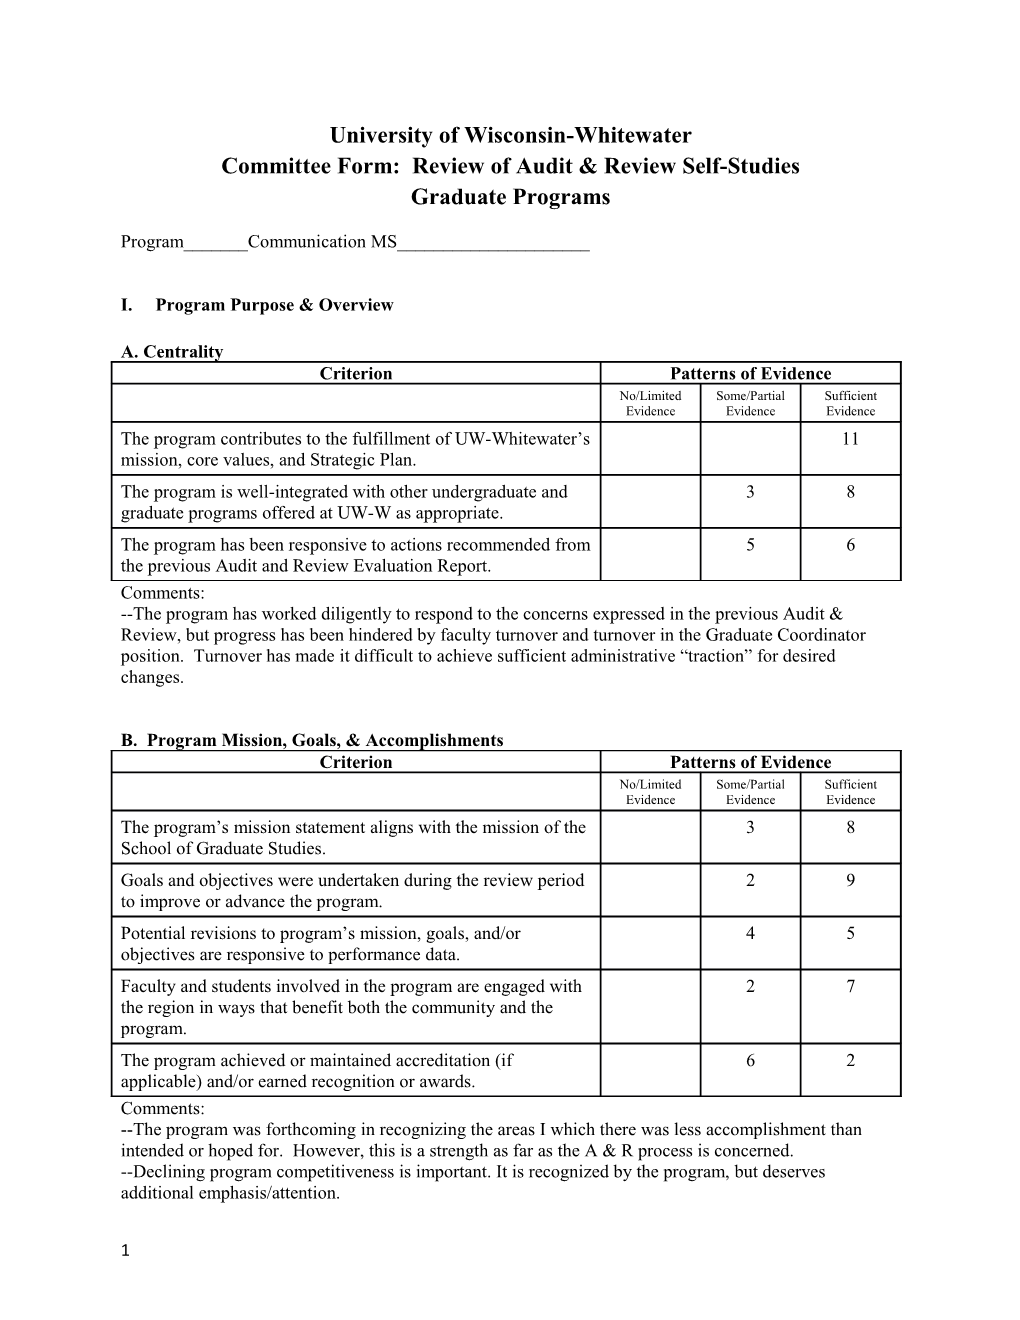 Committee Form: Review of Audit & Review Self-Studies